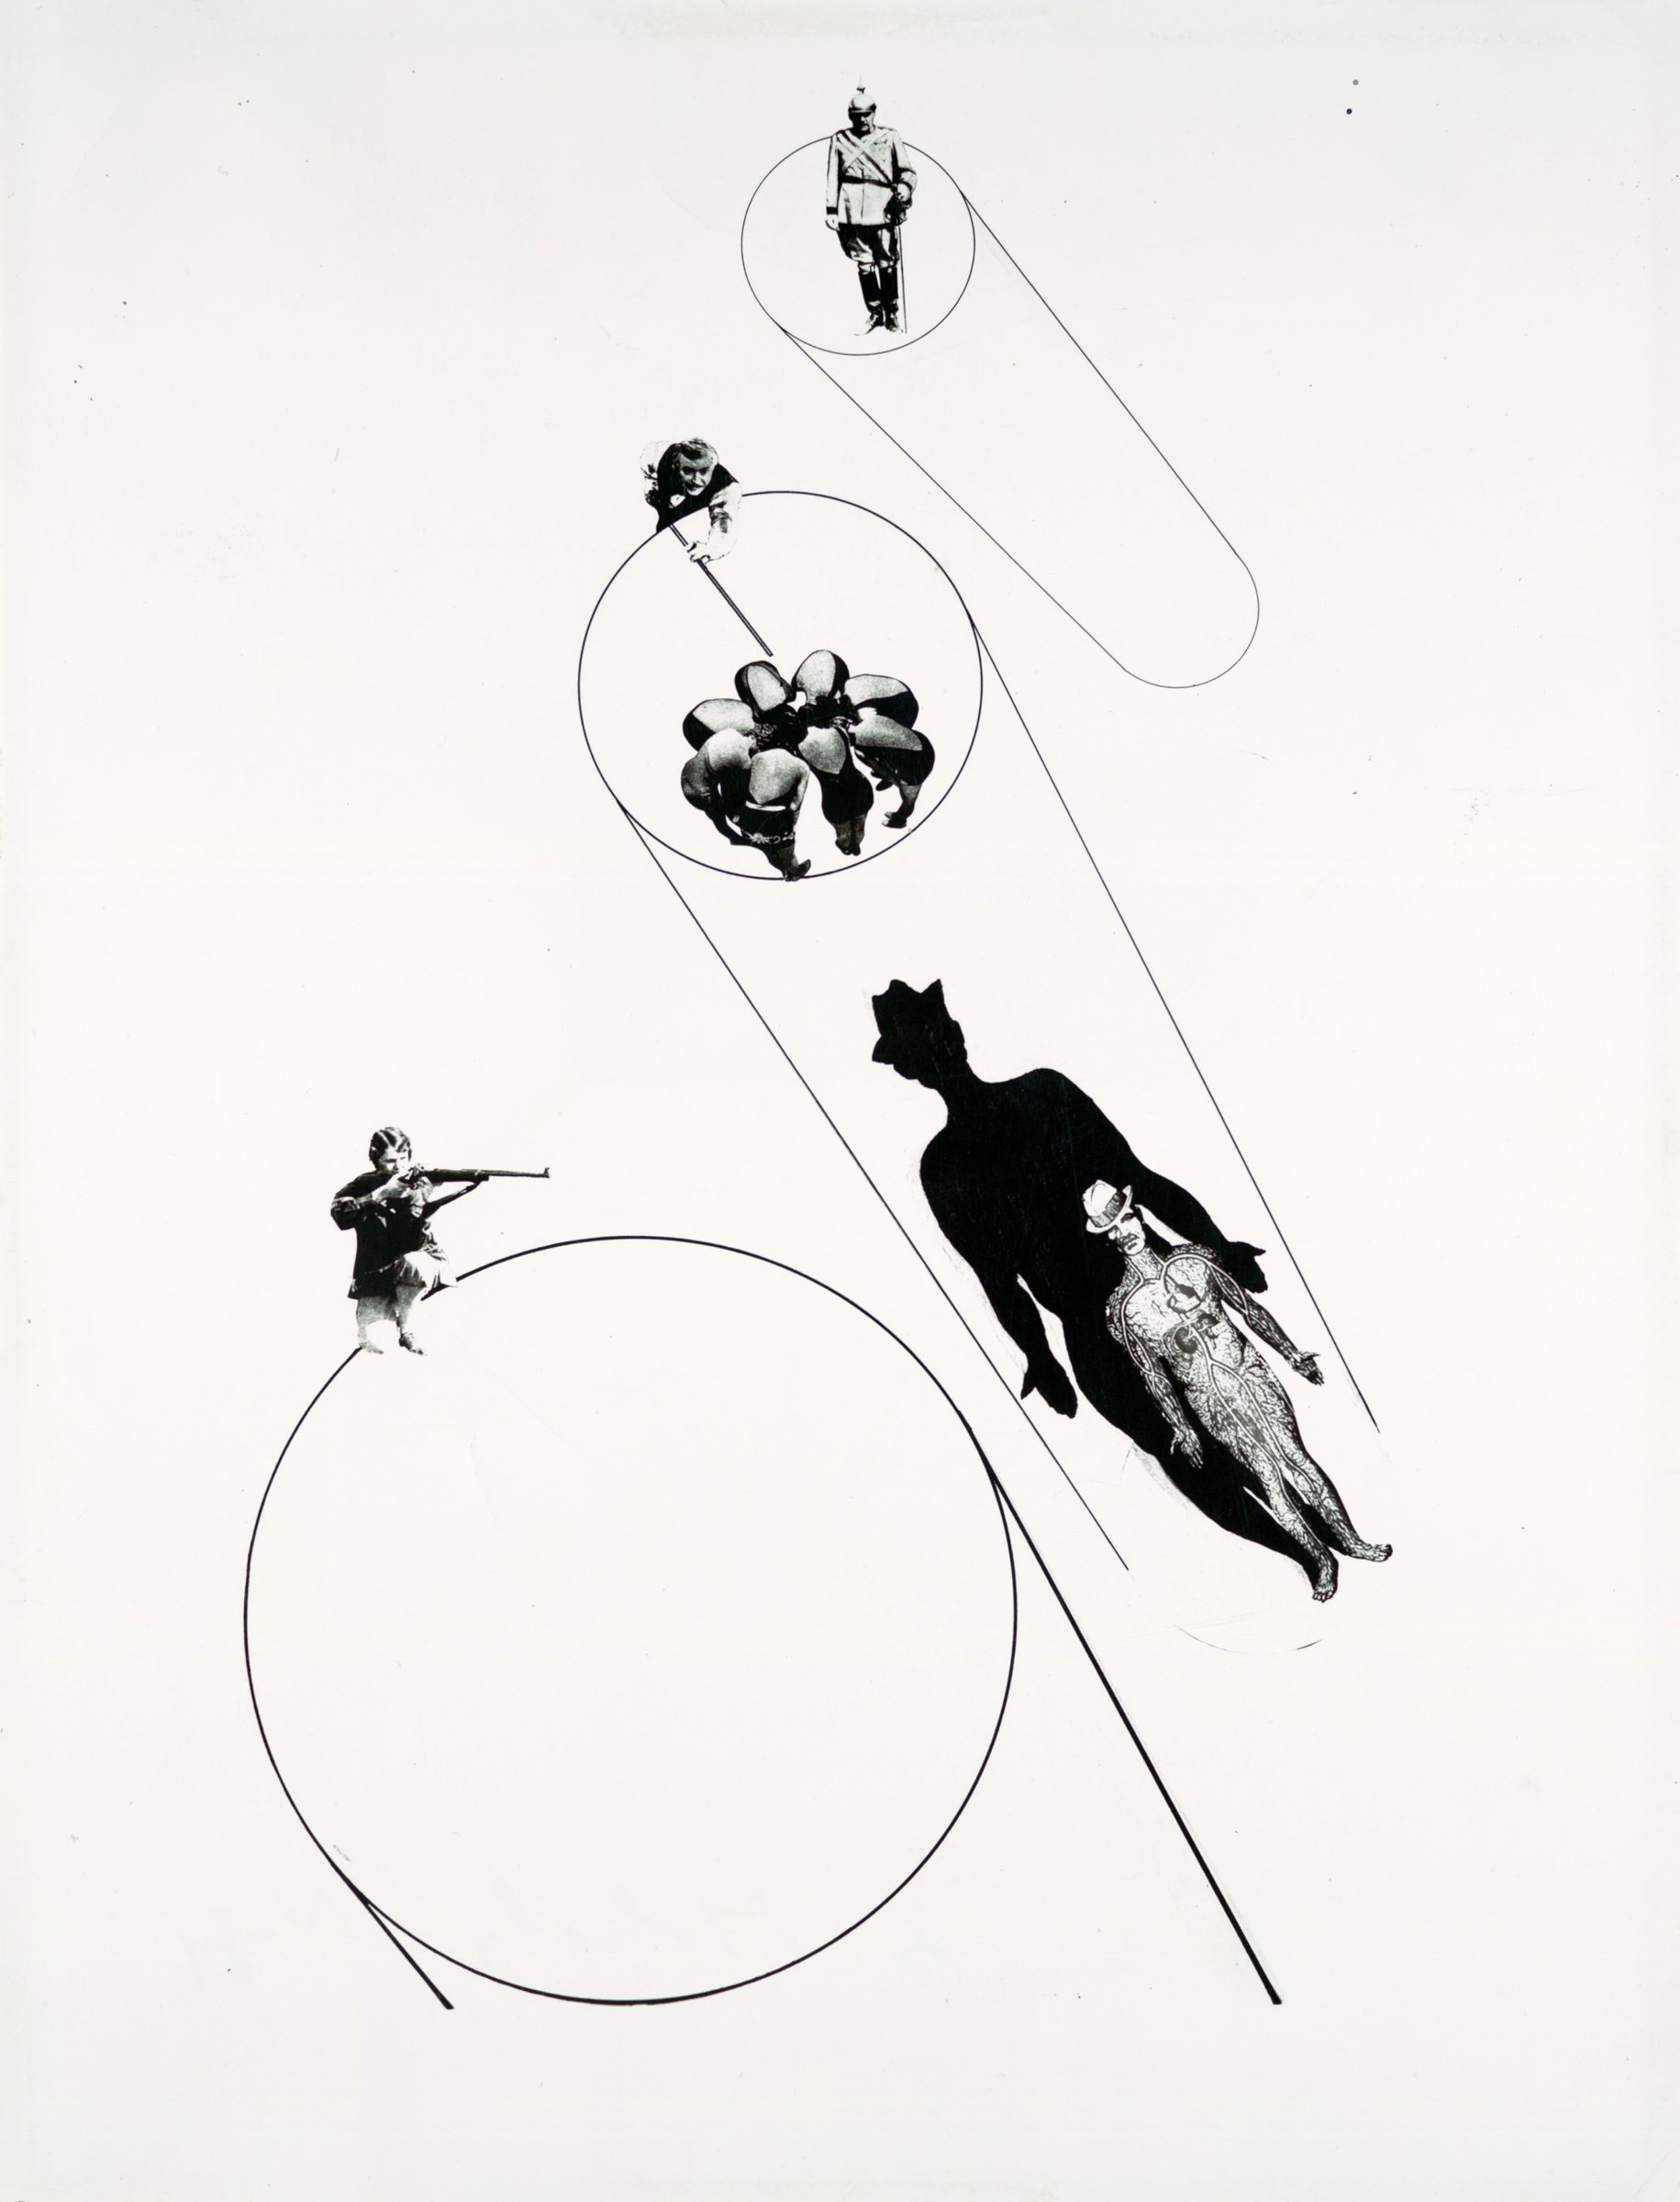  Target Practice (In the Name of the Law), by László Moholy-Nagy | Source: <a href="https://www.metmuseum.org/art">The Met</a> | License: CC0